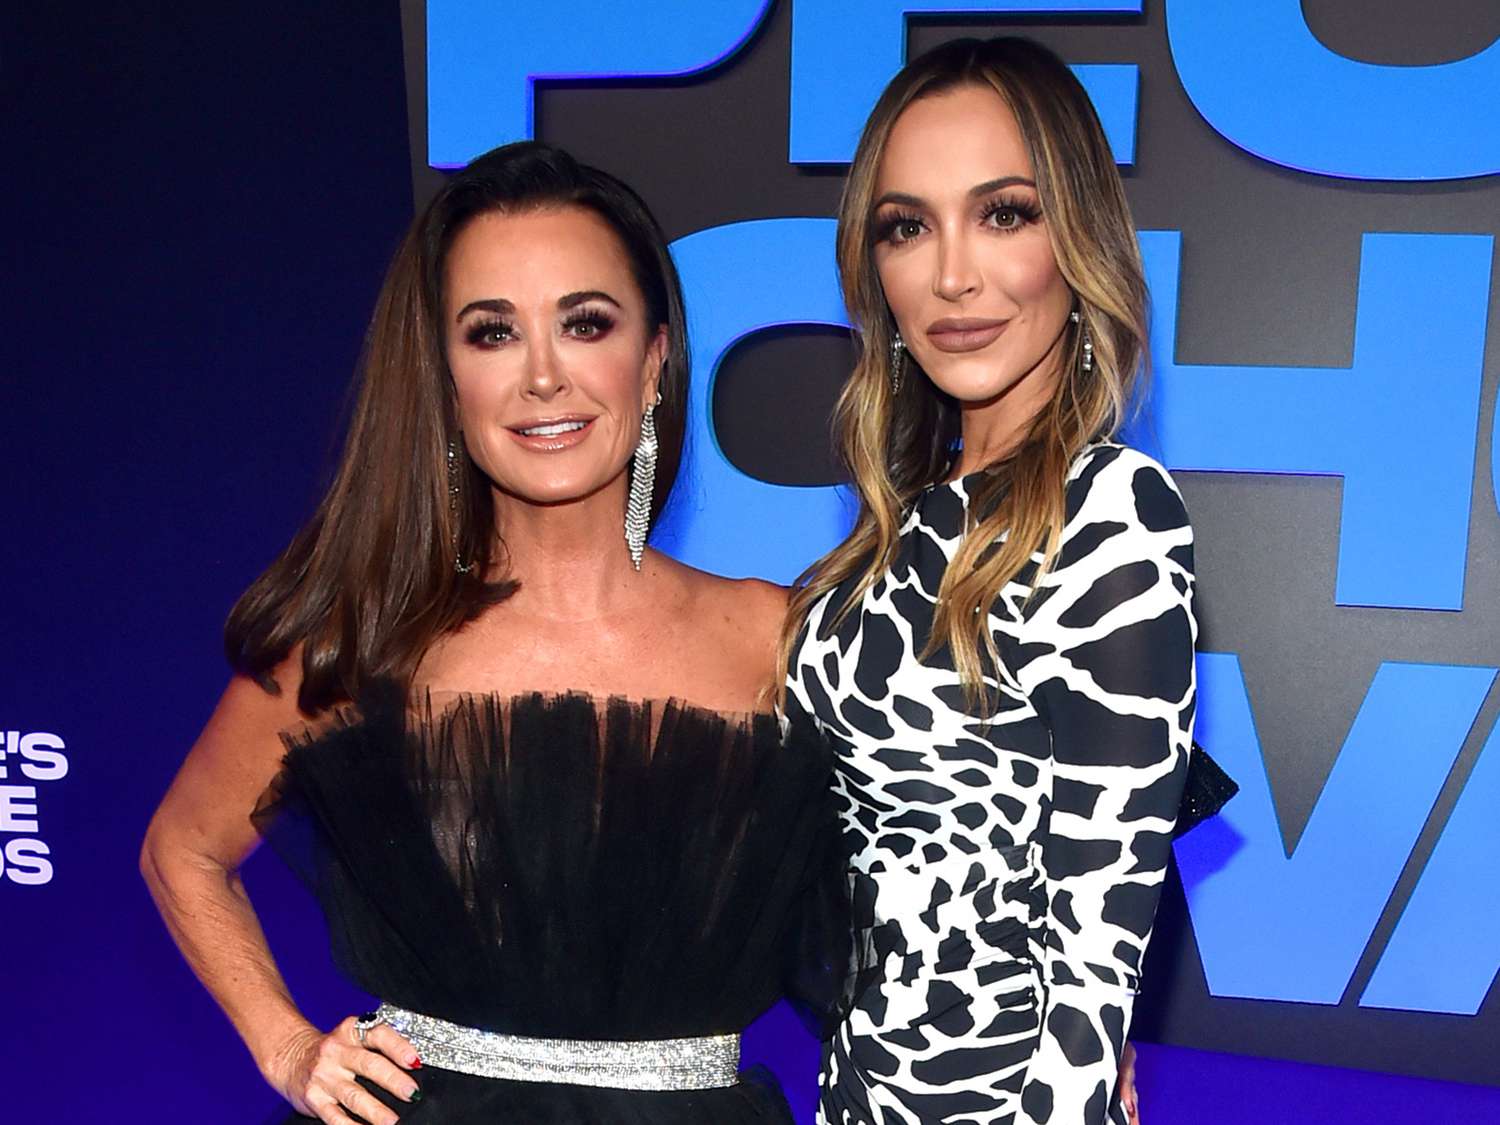 Kyle Richards and Farrah Aldjufrie arrive to the 2021 People's Choice Awards held at Barker Hangar on December 7, 2021 in Santa Monica, California